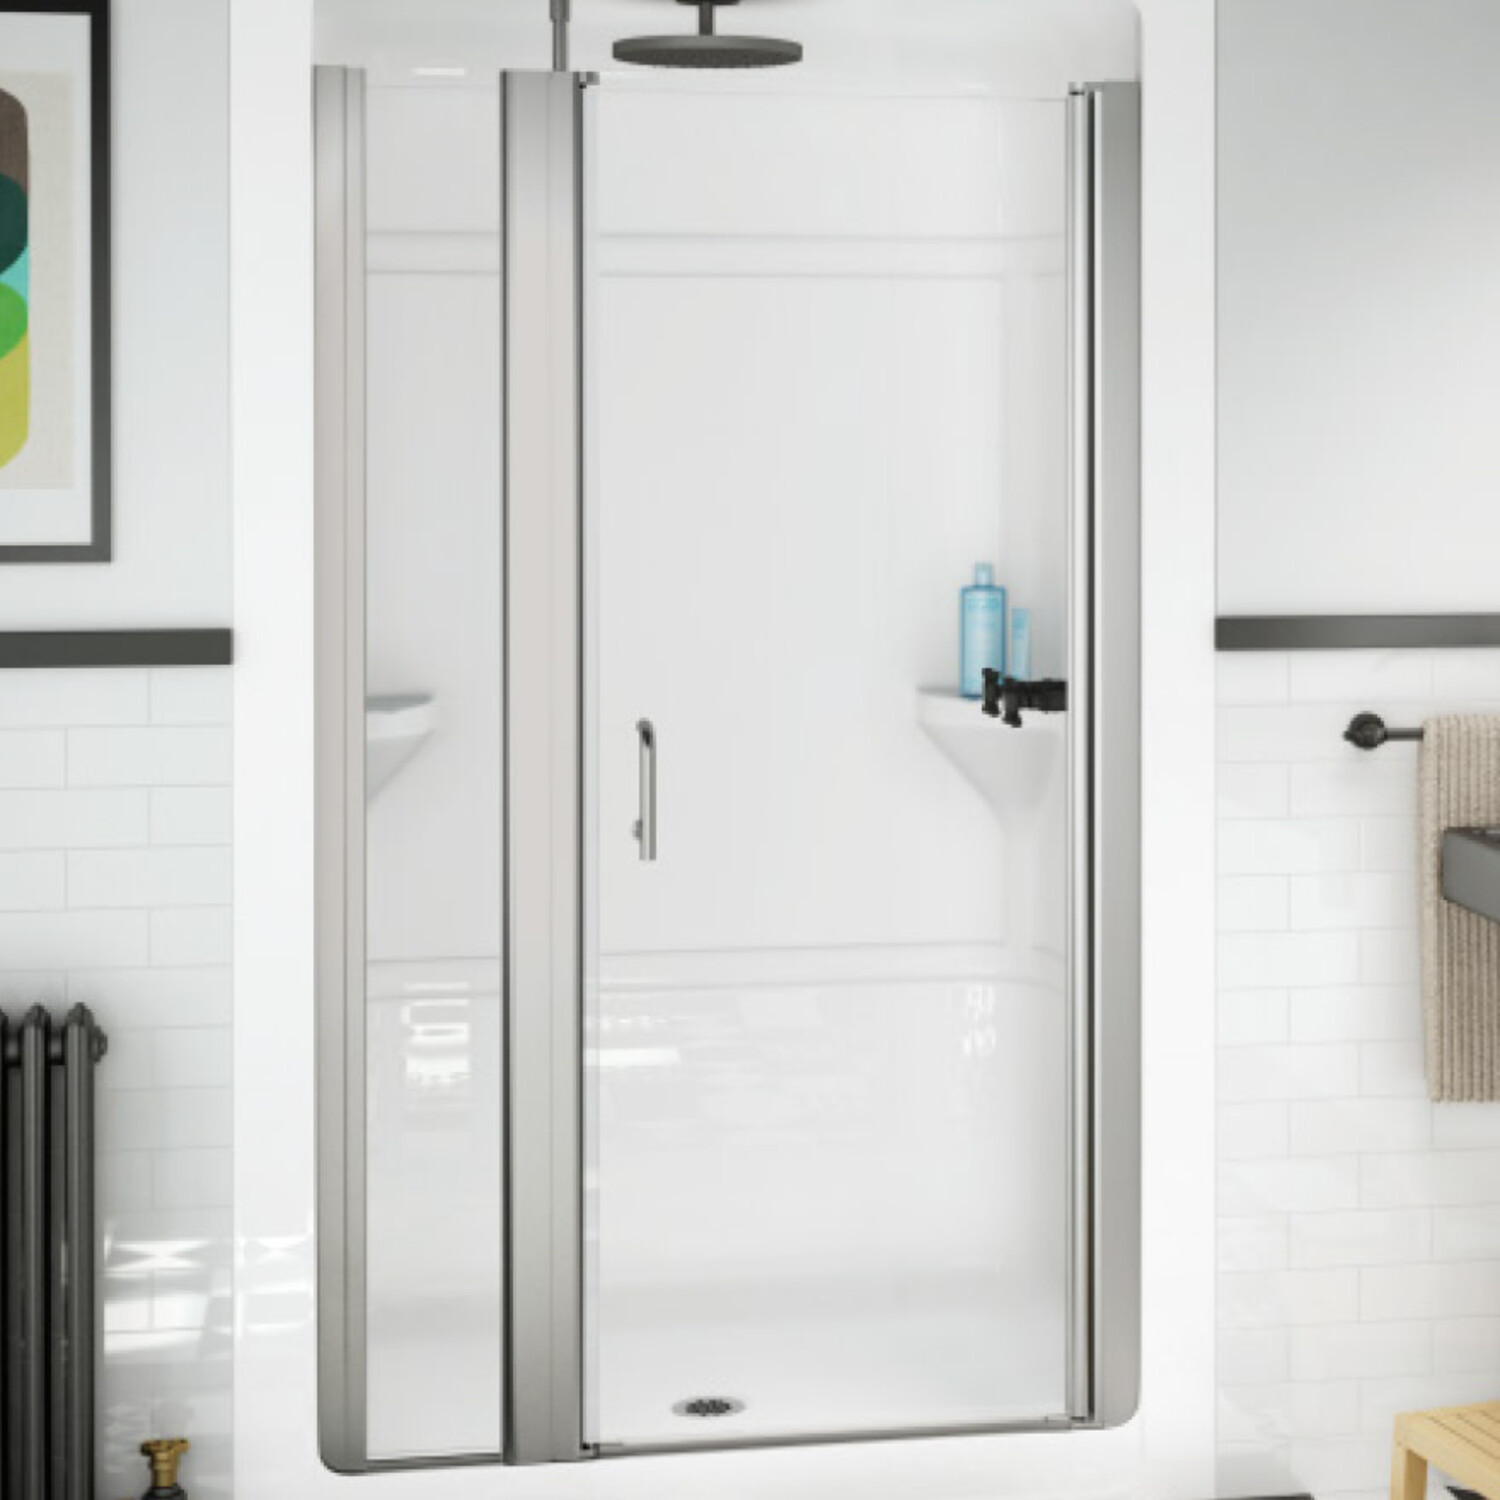 Keeping A Glass Shower Door Clean For 6+ Months - Serendipity And Spice